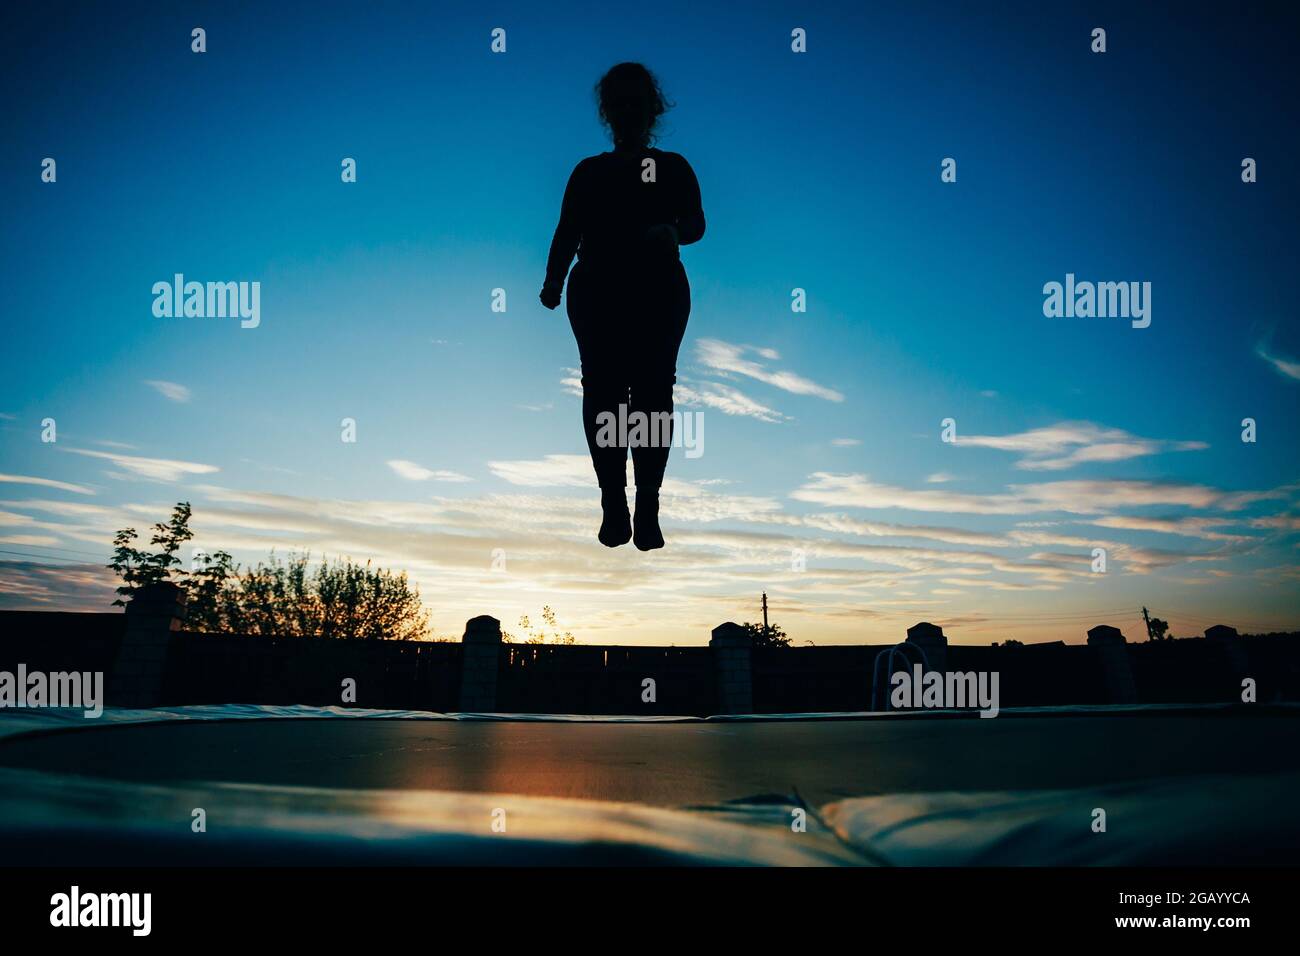 Silhouette Of Beautiful Plus Size Young Woman Girl Jumping On Trampoline Stock Photo